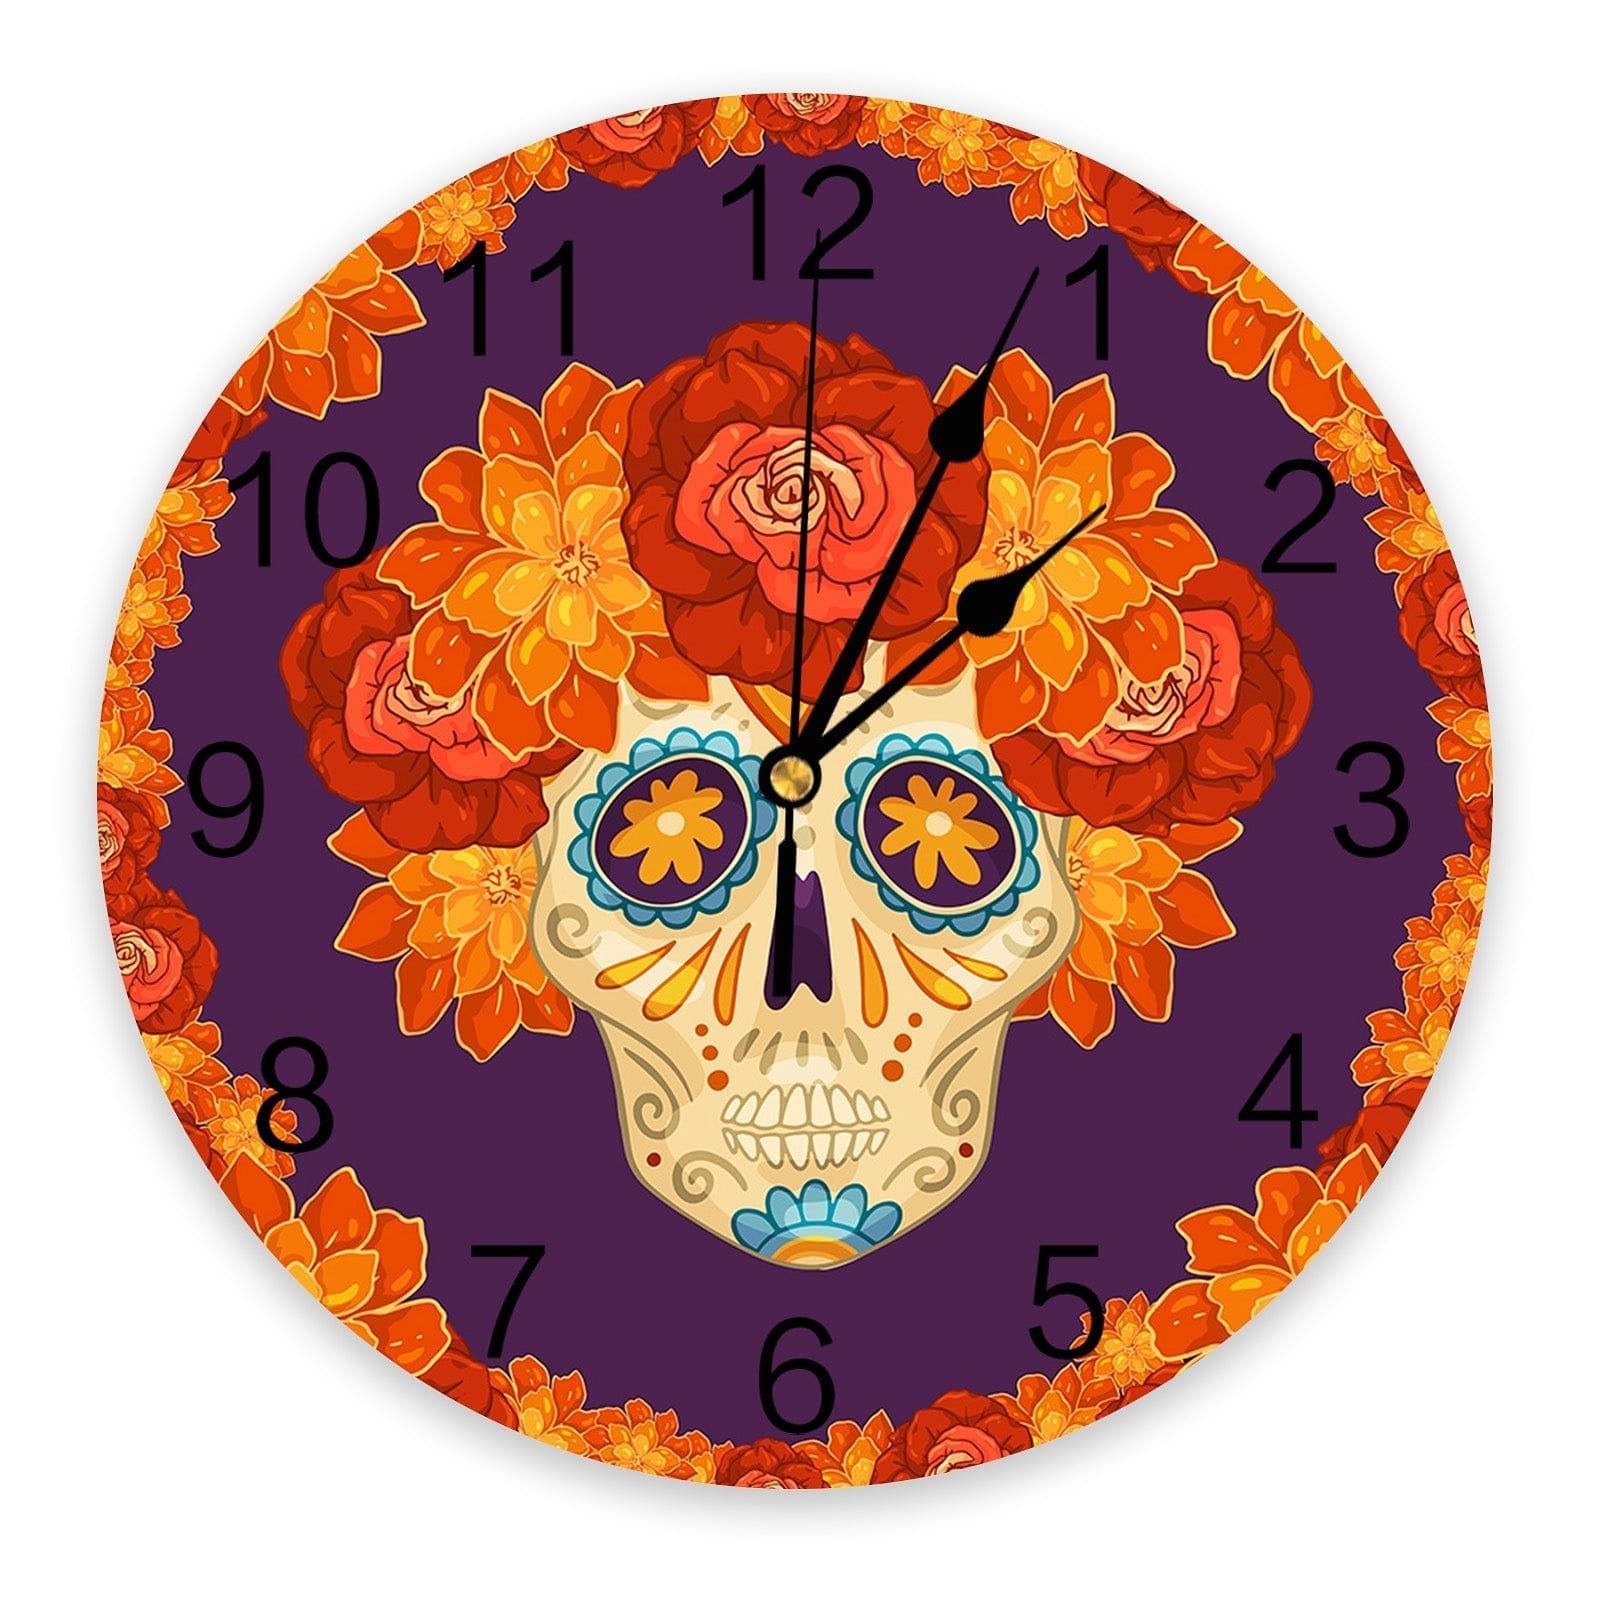 Mexican Skull Flower Wall Clock Home Decoration